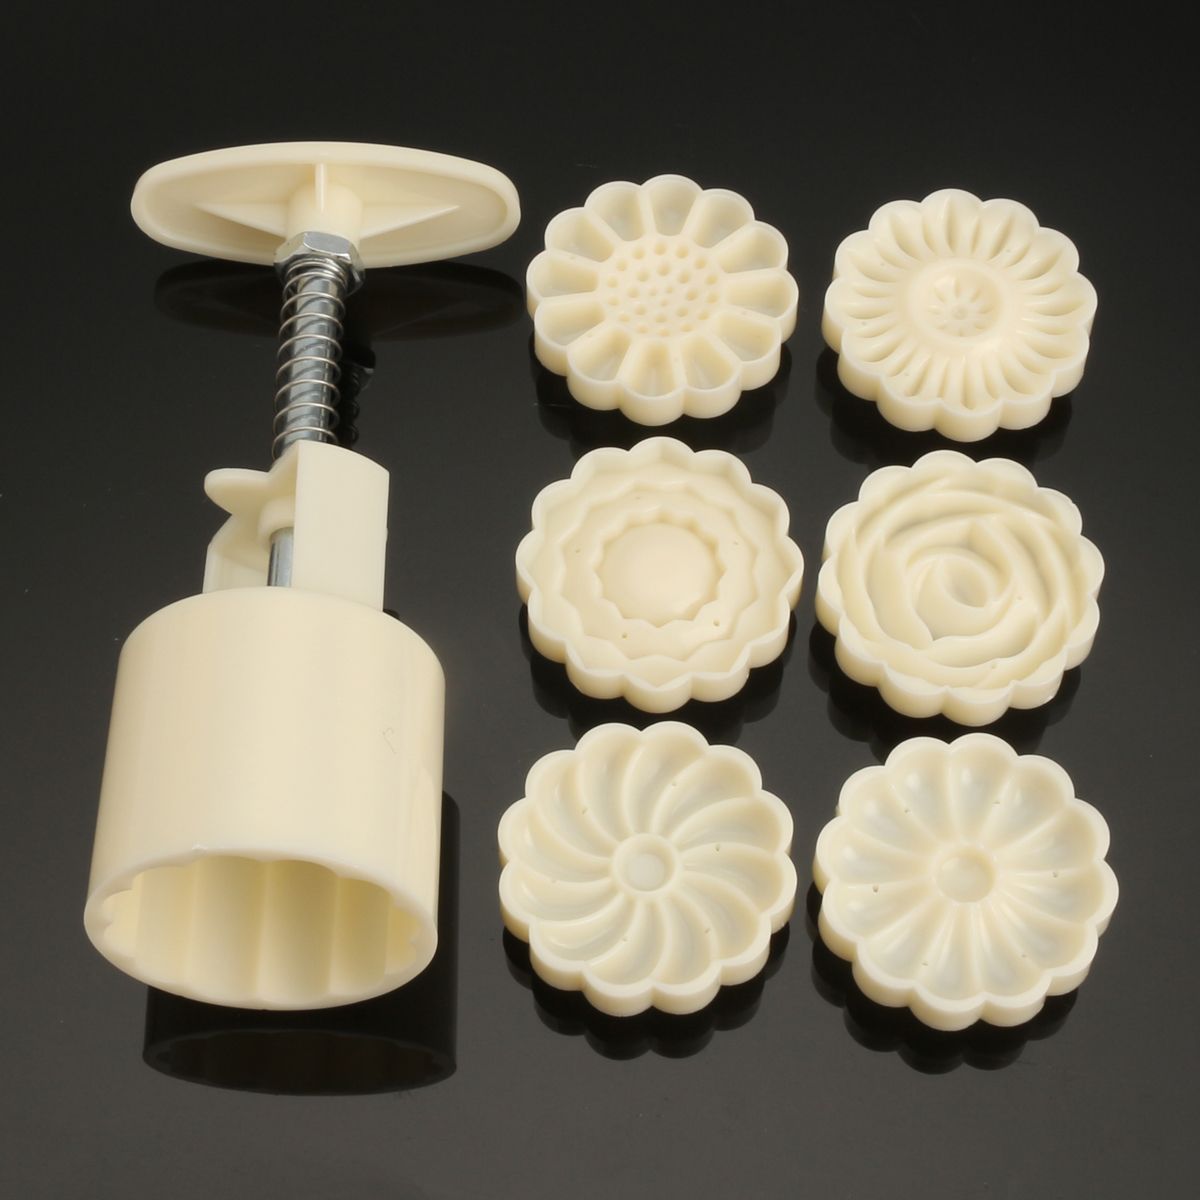 Round-Mooncake-Pastry-Mold-50g-Hand-Press-Mould-Flower-Pattern-Festival-Decor-DIY-Decor-w-6-Stamps-1339042